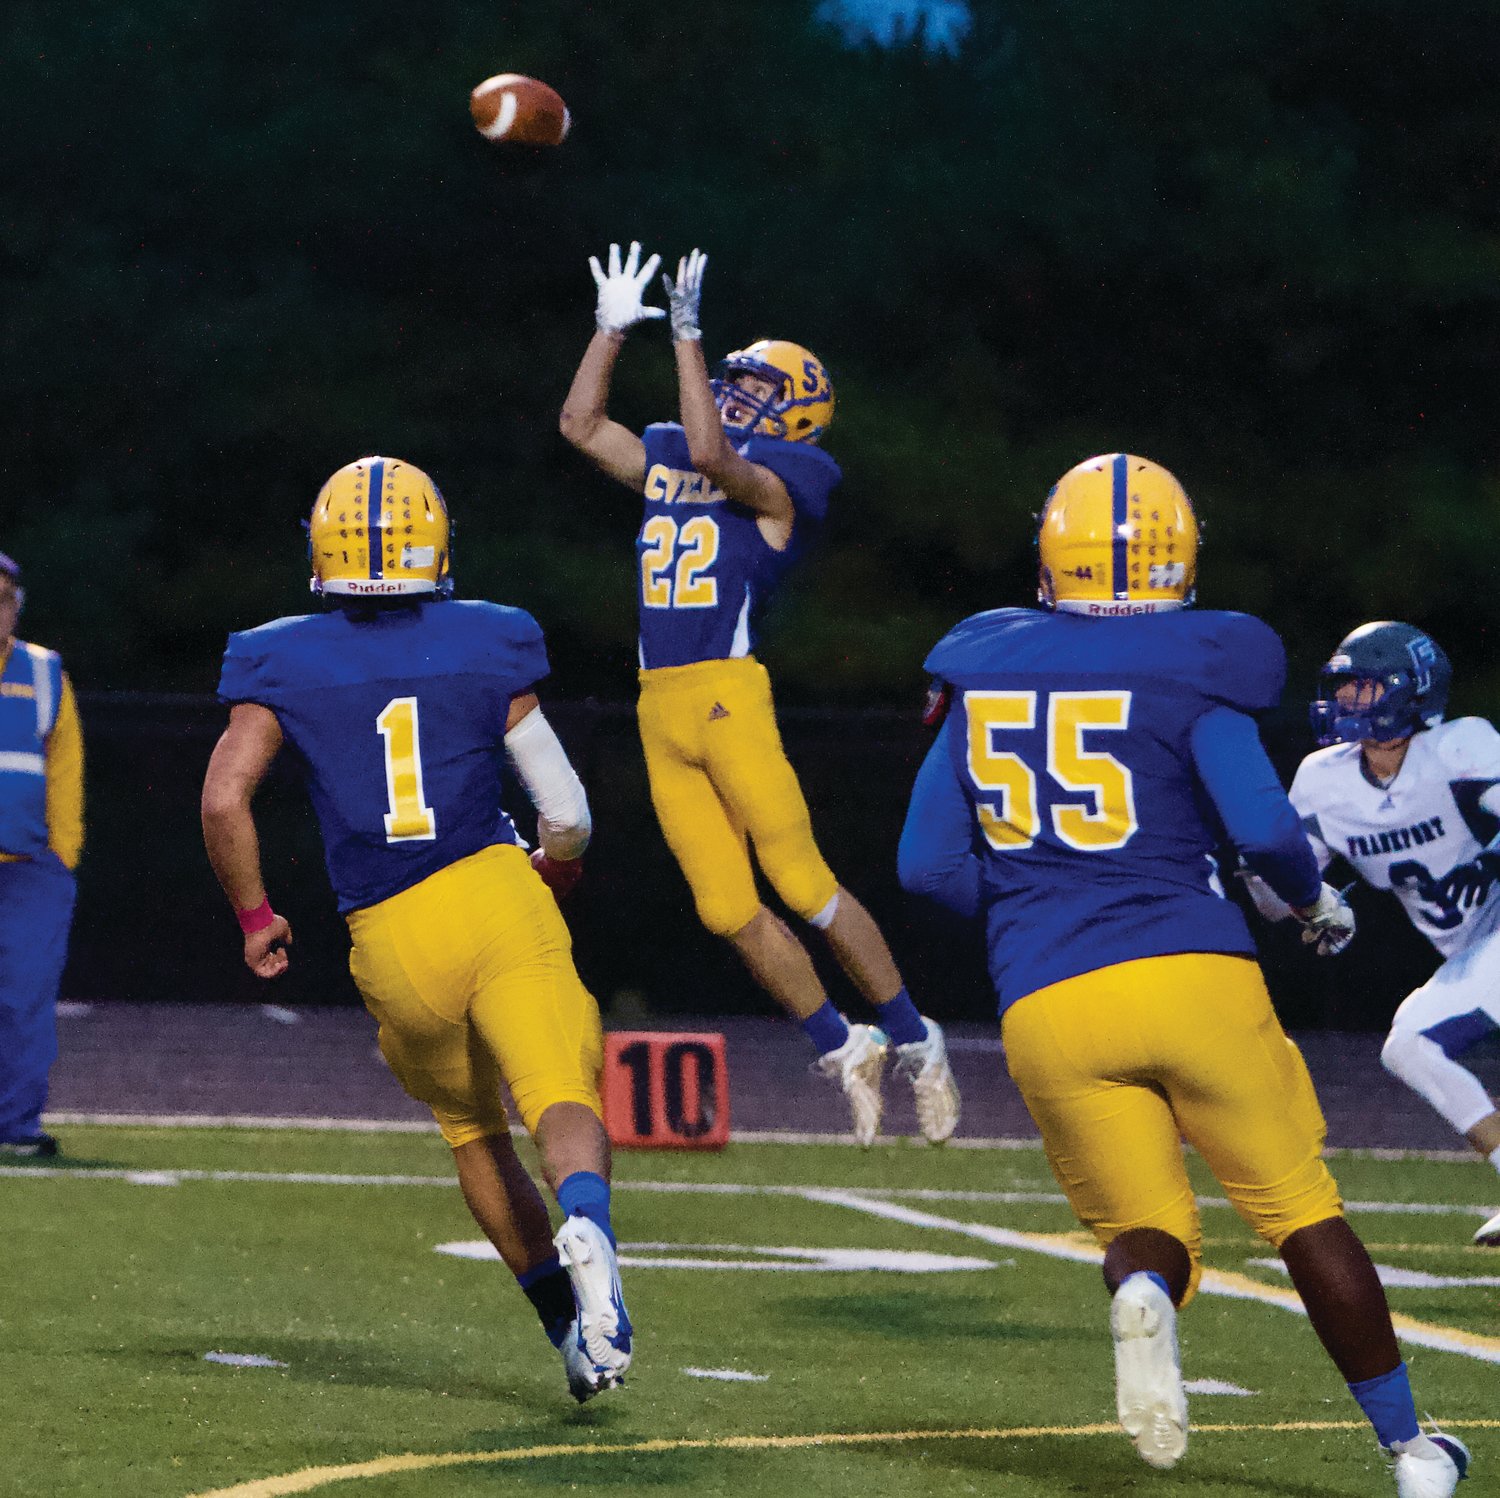 Austin Motz reaches for one of his two interceptions on the night.